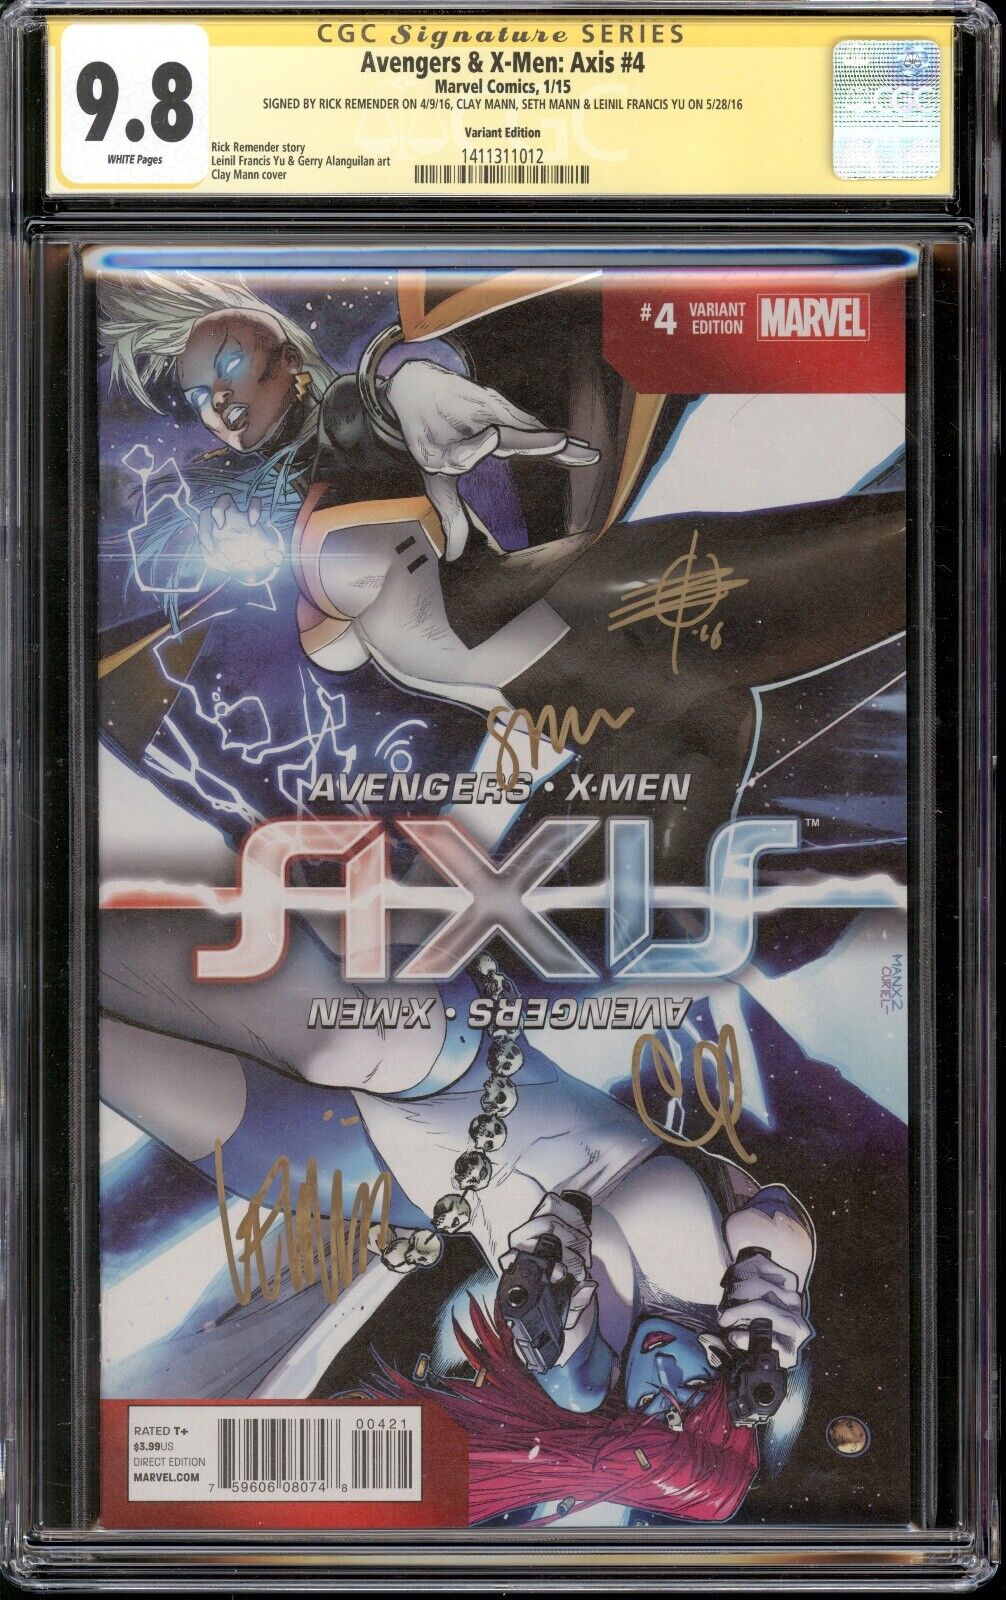 Avengers & X-Men: AXIS #4 Variant CGC SS 9.8 Signed Rick Remender, Clay Mann, Yu